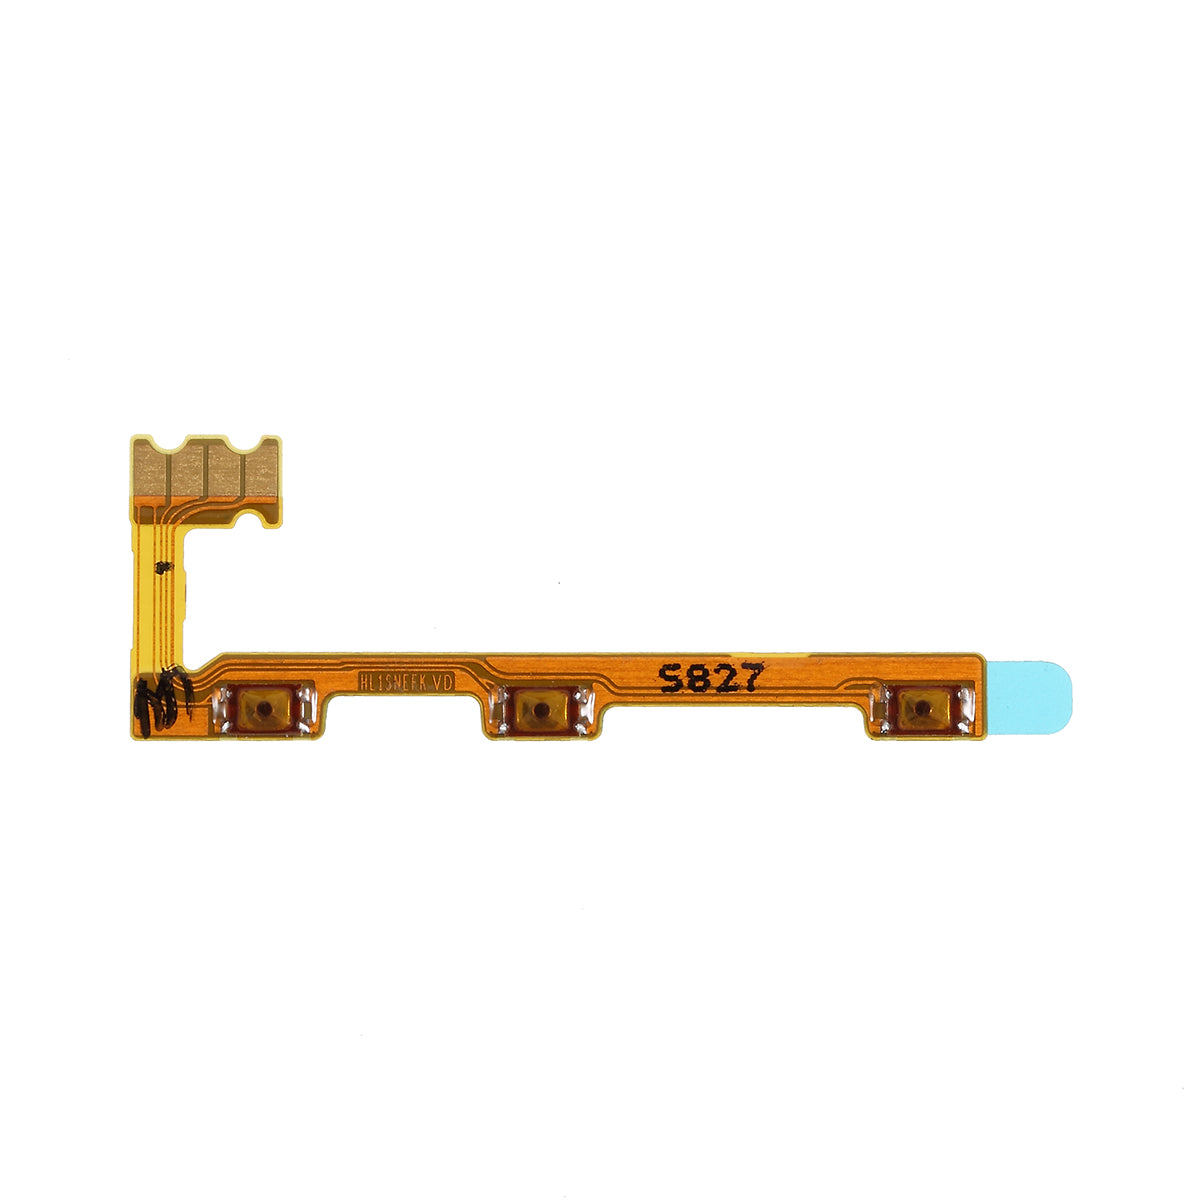 OEM Power On/Off and Volume Buttons Flex Cable Replace Part for Huawei Mate 20 Lite